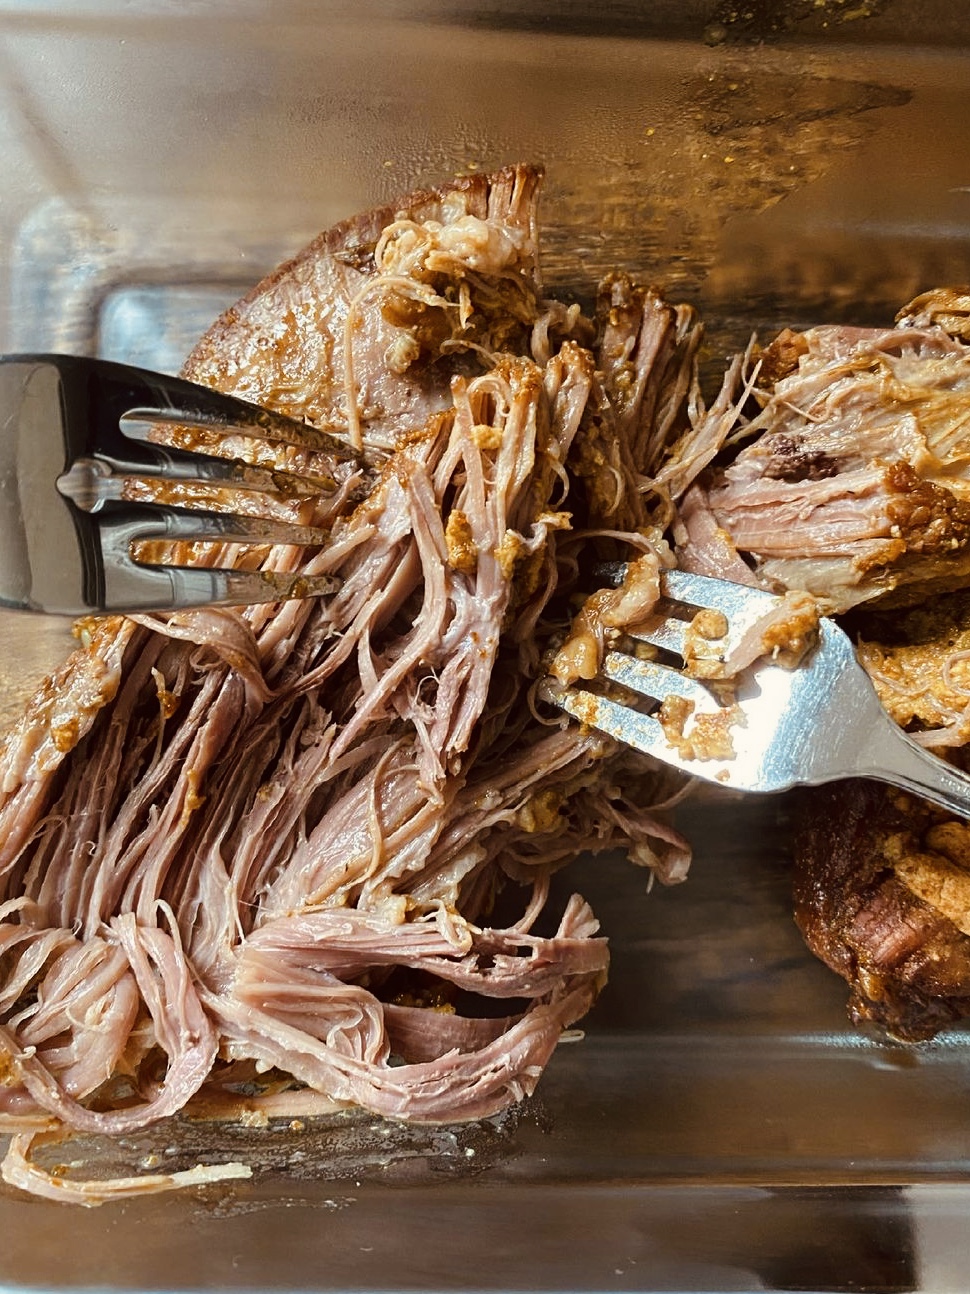 Beef brisket being pulled apart with two forks in a glass container.